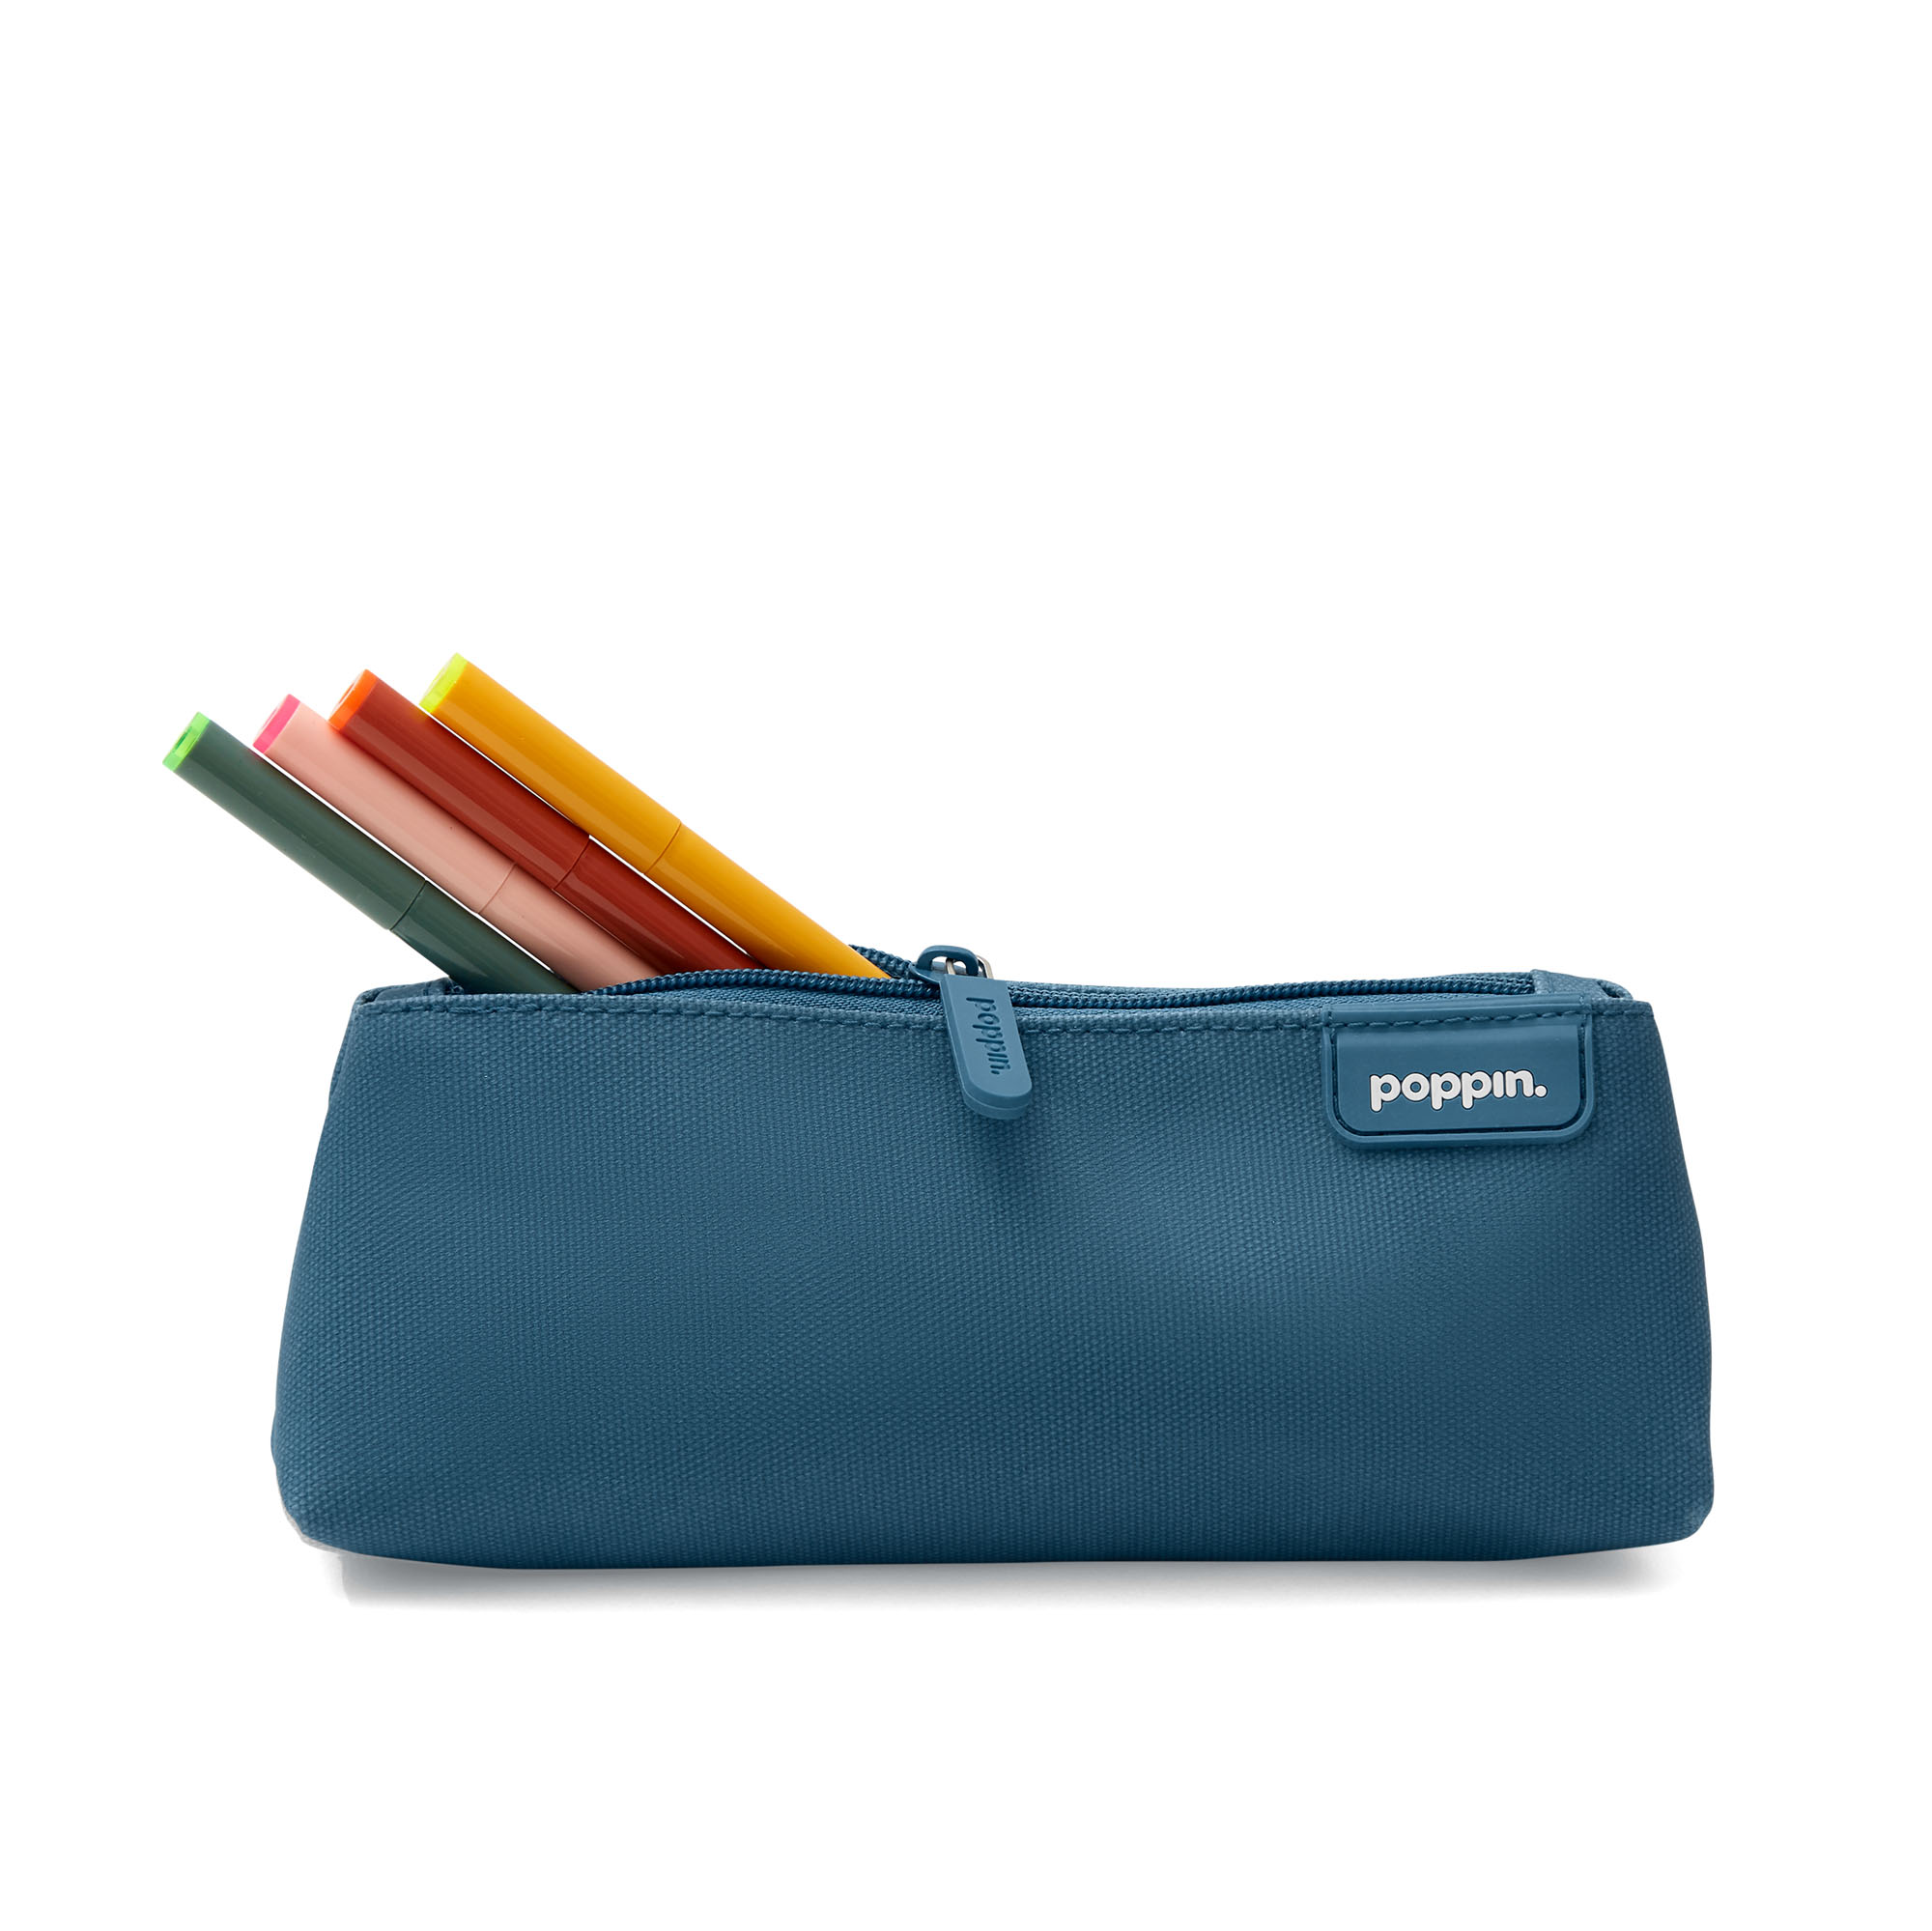 Blue pencil case isolated on a transparent background 21491773 PNG